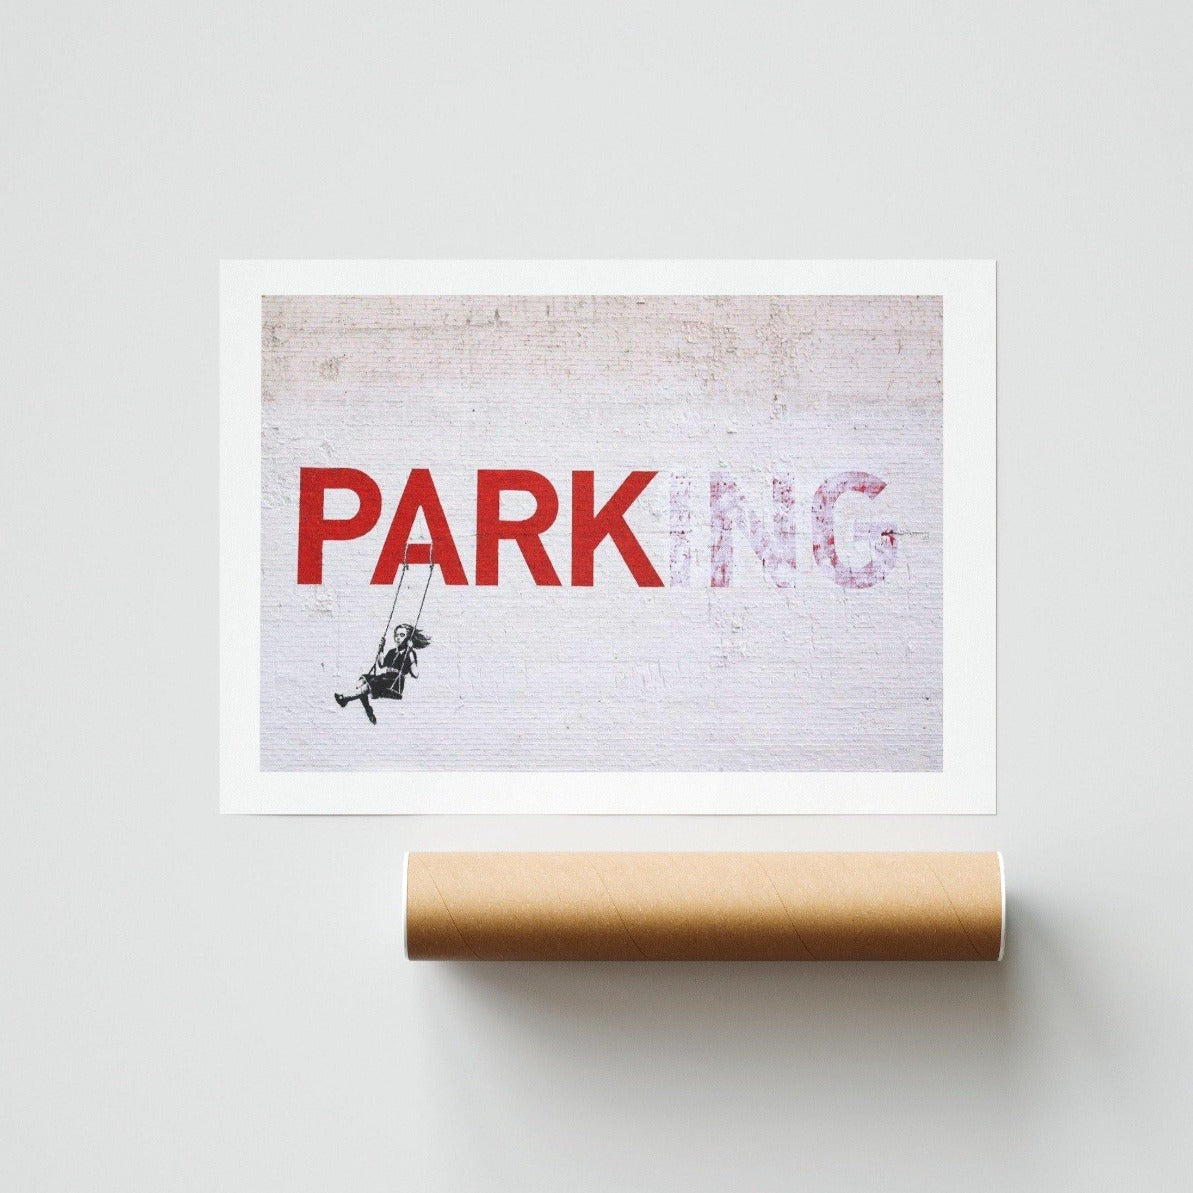 Want to add some edge to your home or office? Check out this Banksy street art parking poster. This street art piece is sure to add some personality to any space. With its simple design, it's perfect for anyone who wants to add a touch of Banksy to their décor. - 98types